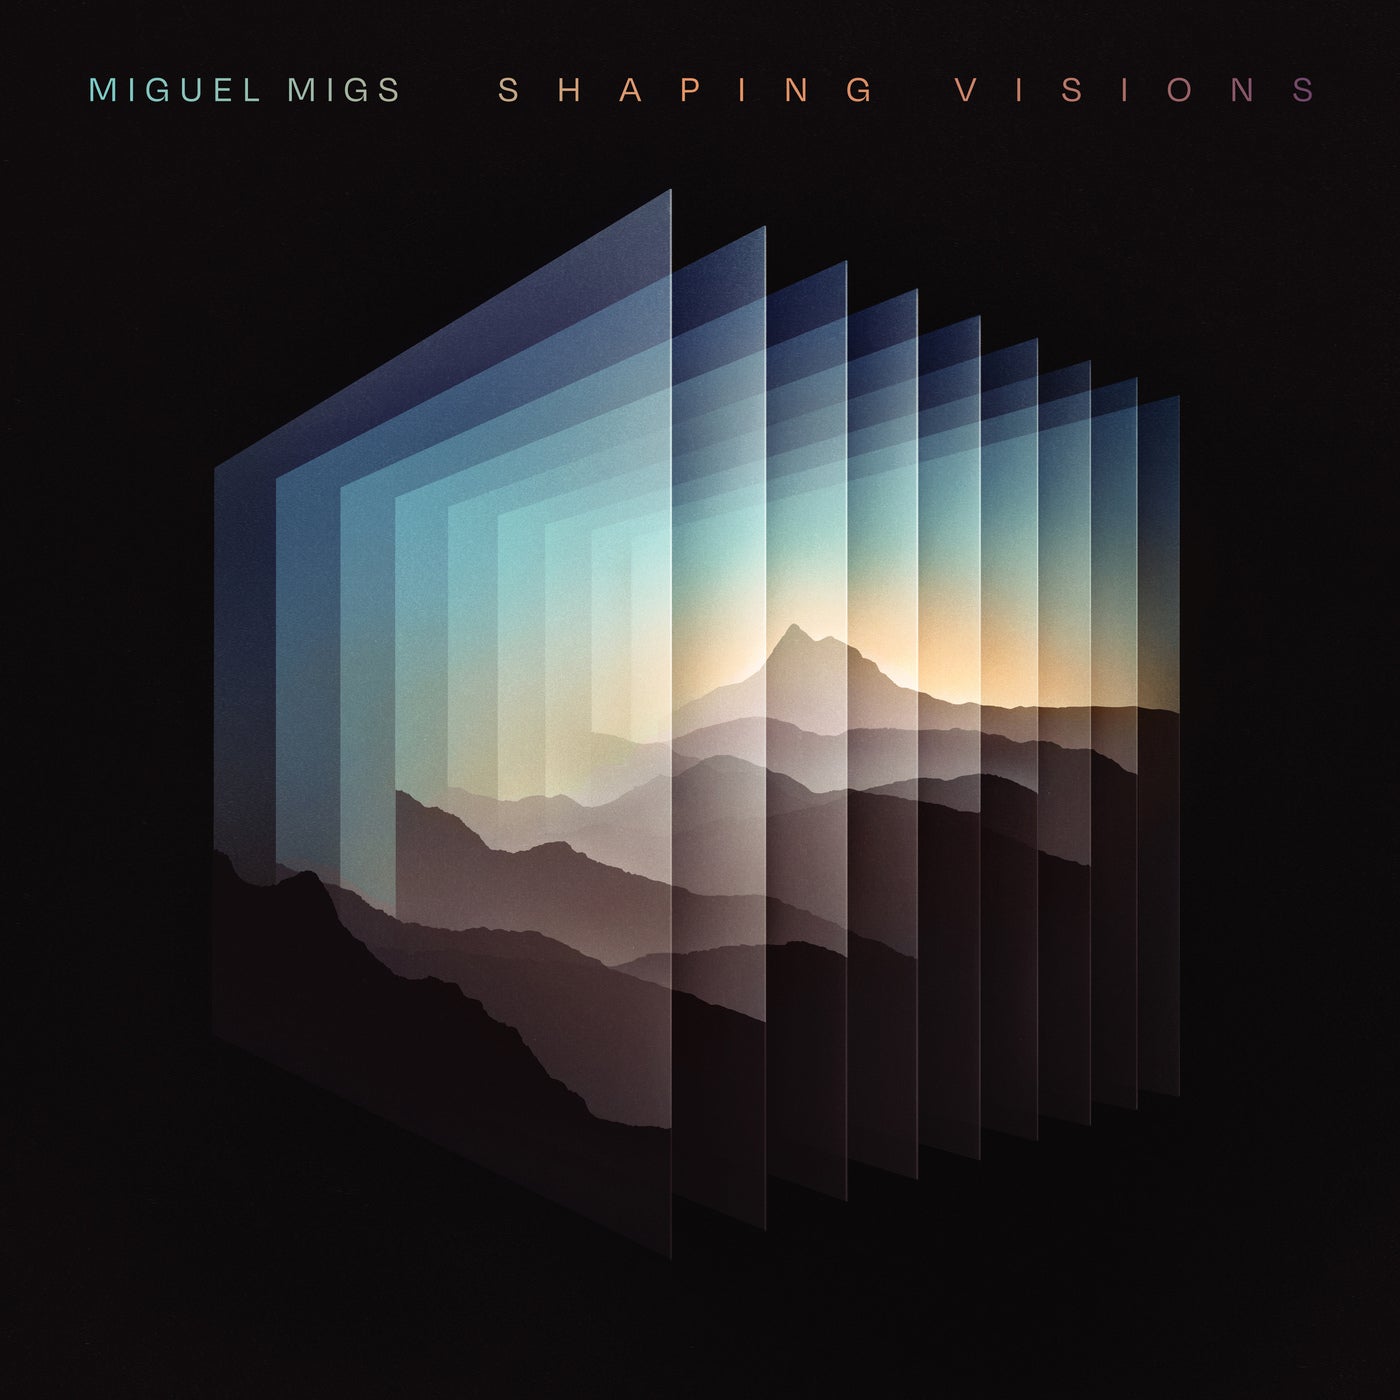 Miguel Migs "Shaping Visions"